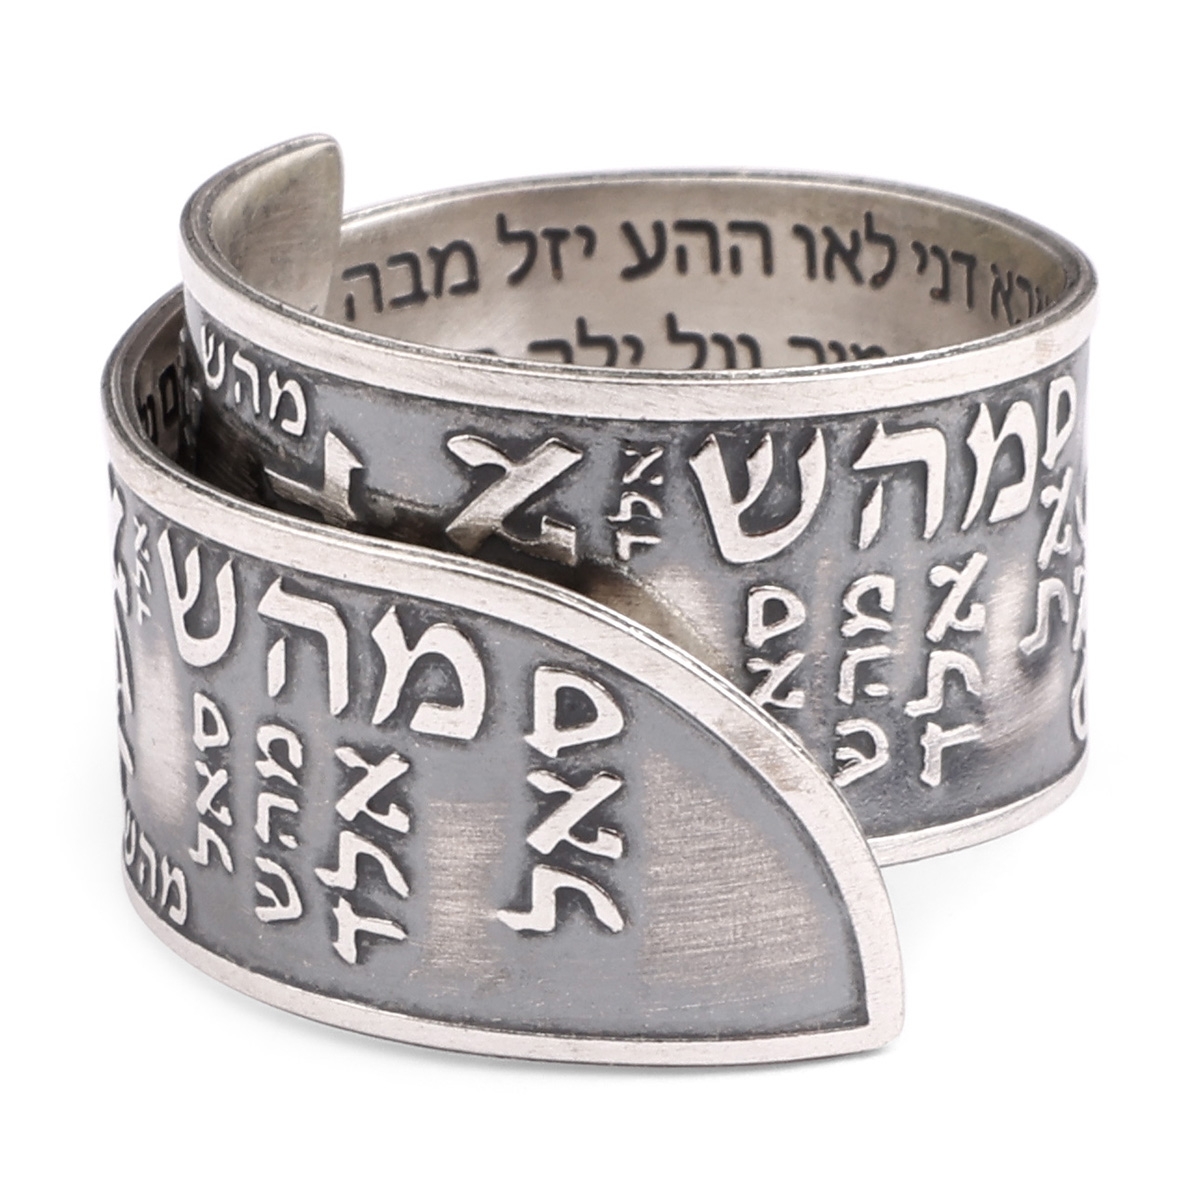 Handcrafted Darkened 925 Sterling Silver Adjustable Unisex Kabbalah Ring With 72 Mystical Names - 1